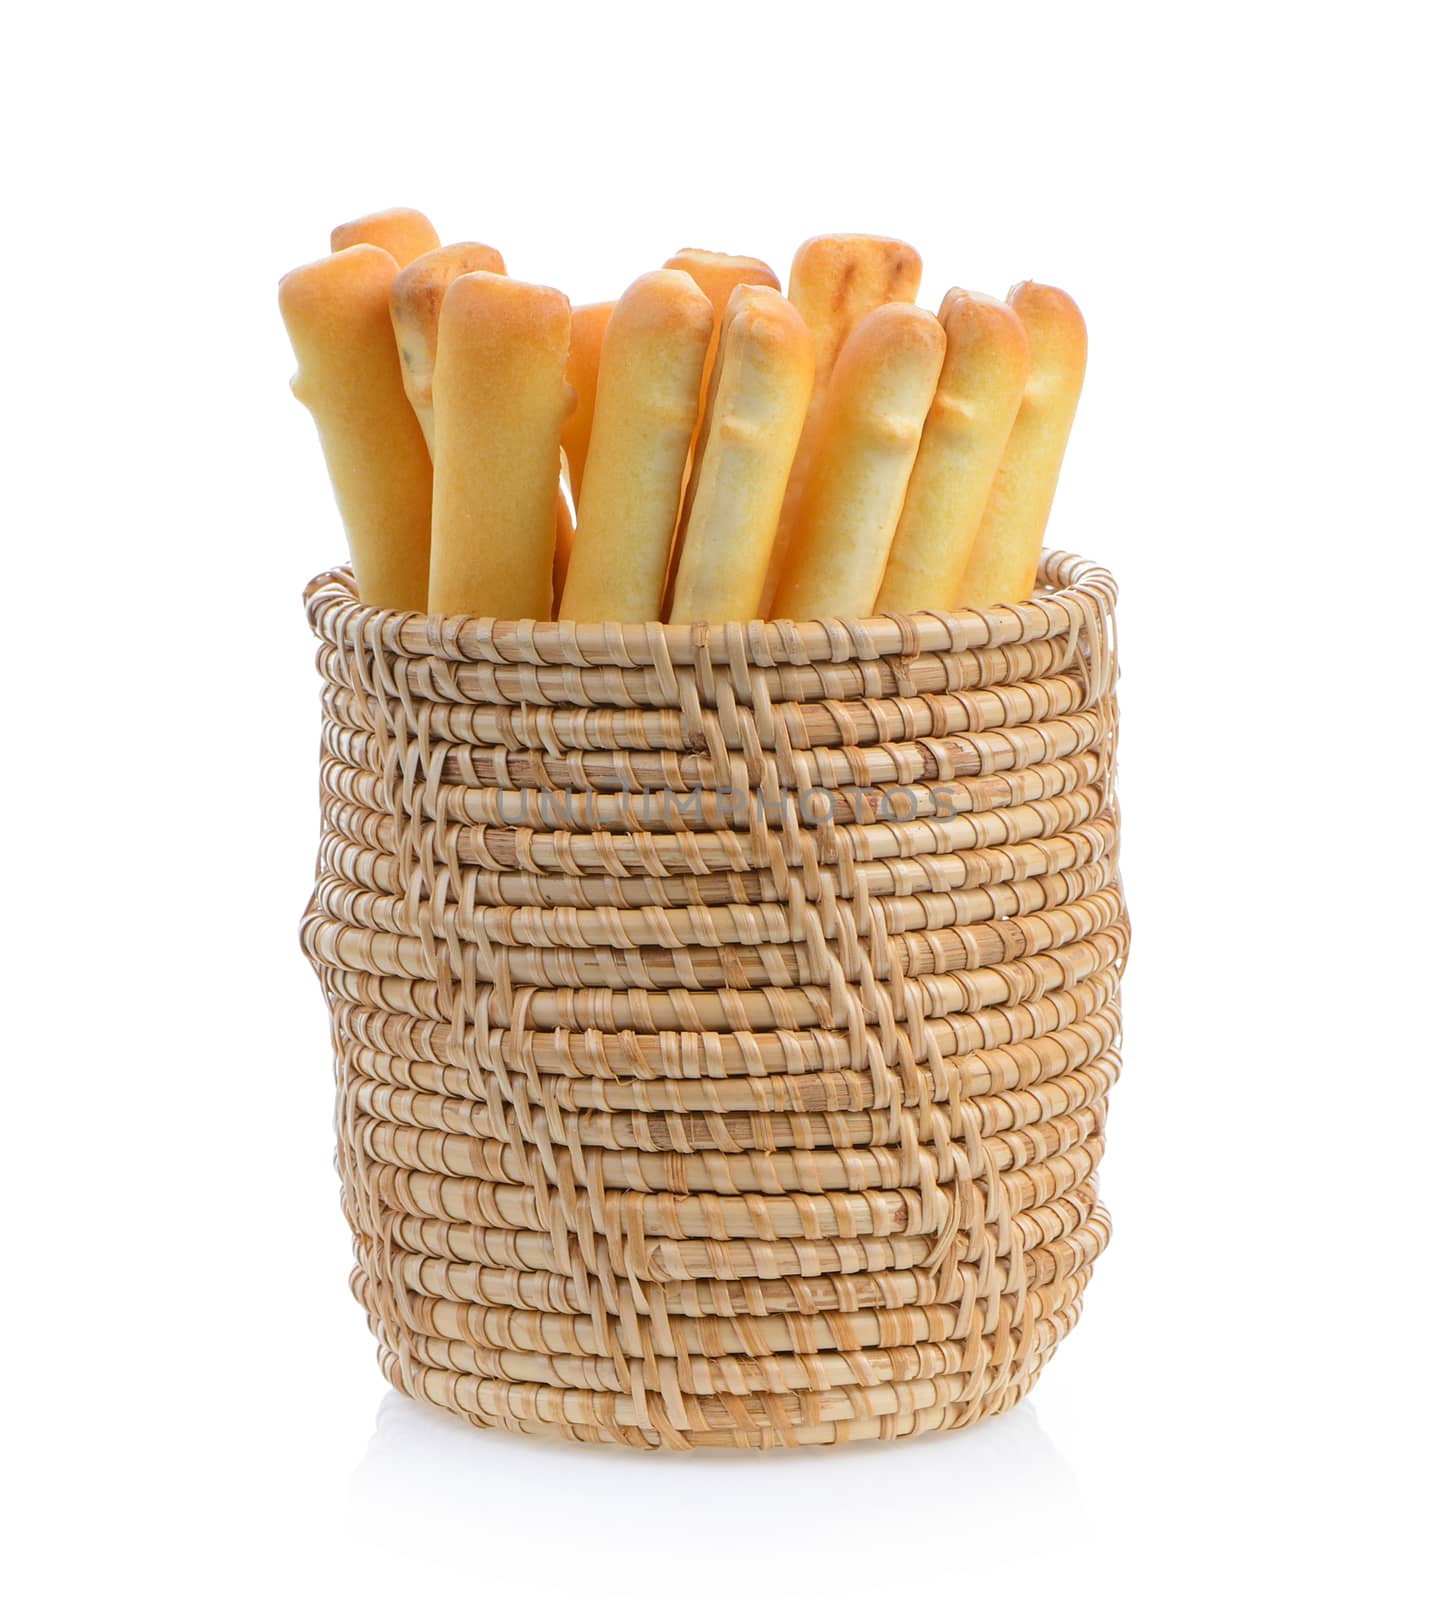 bread sticks in basket isolated on white background by sommai